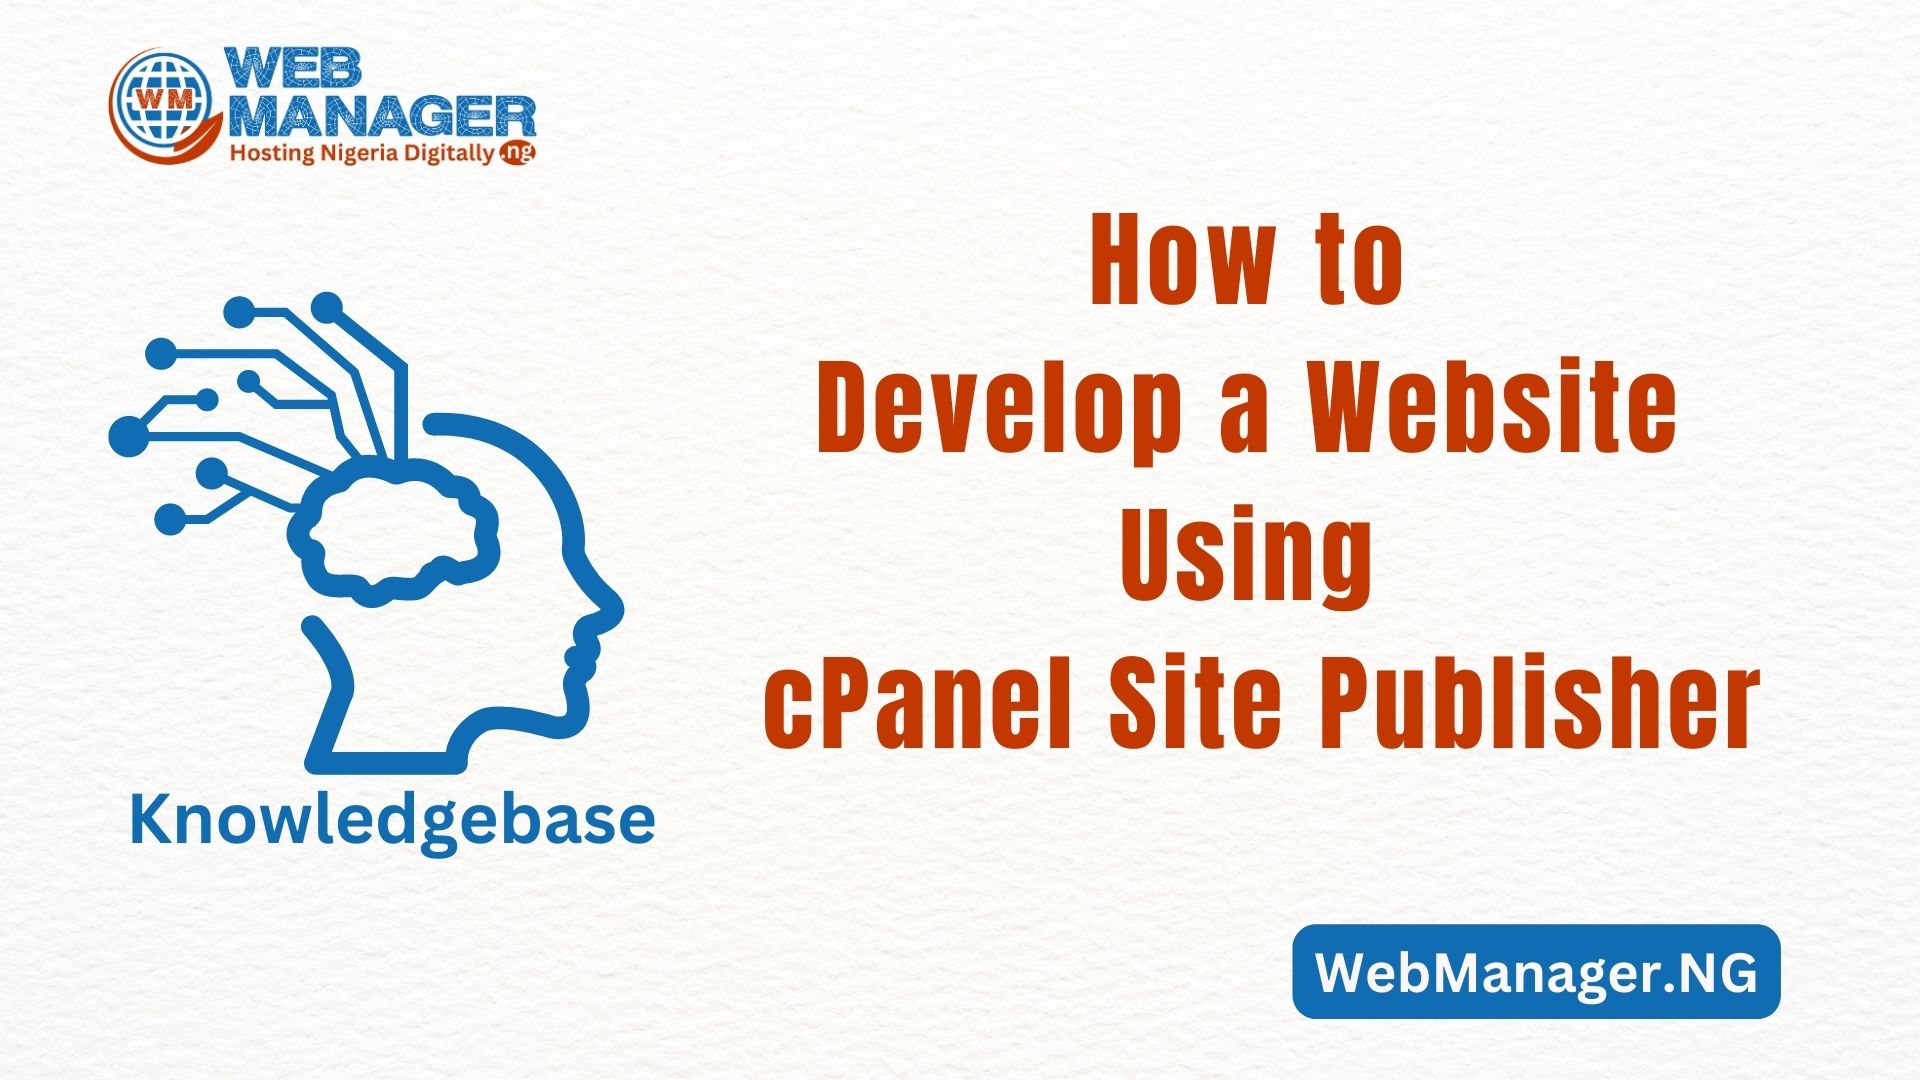 How to Develop a Website Using cPanel Site Publisher